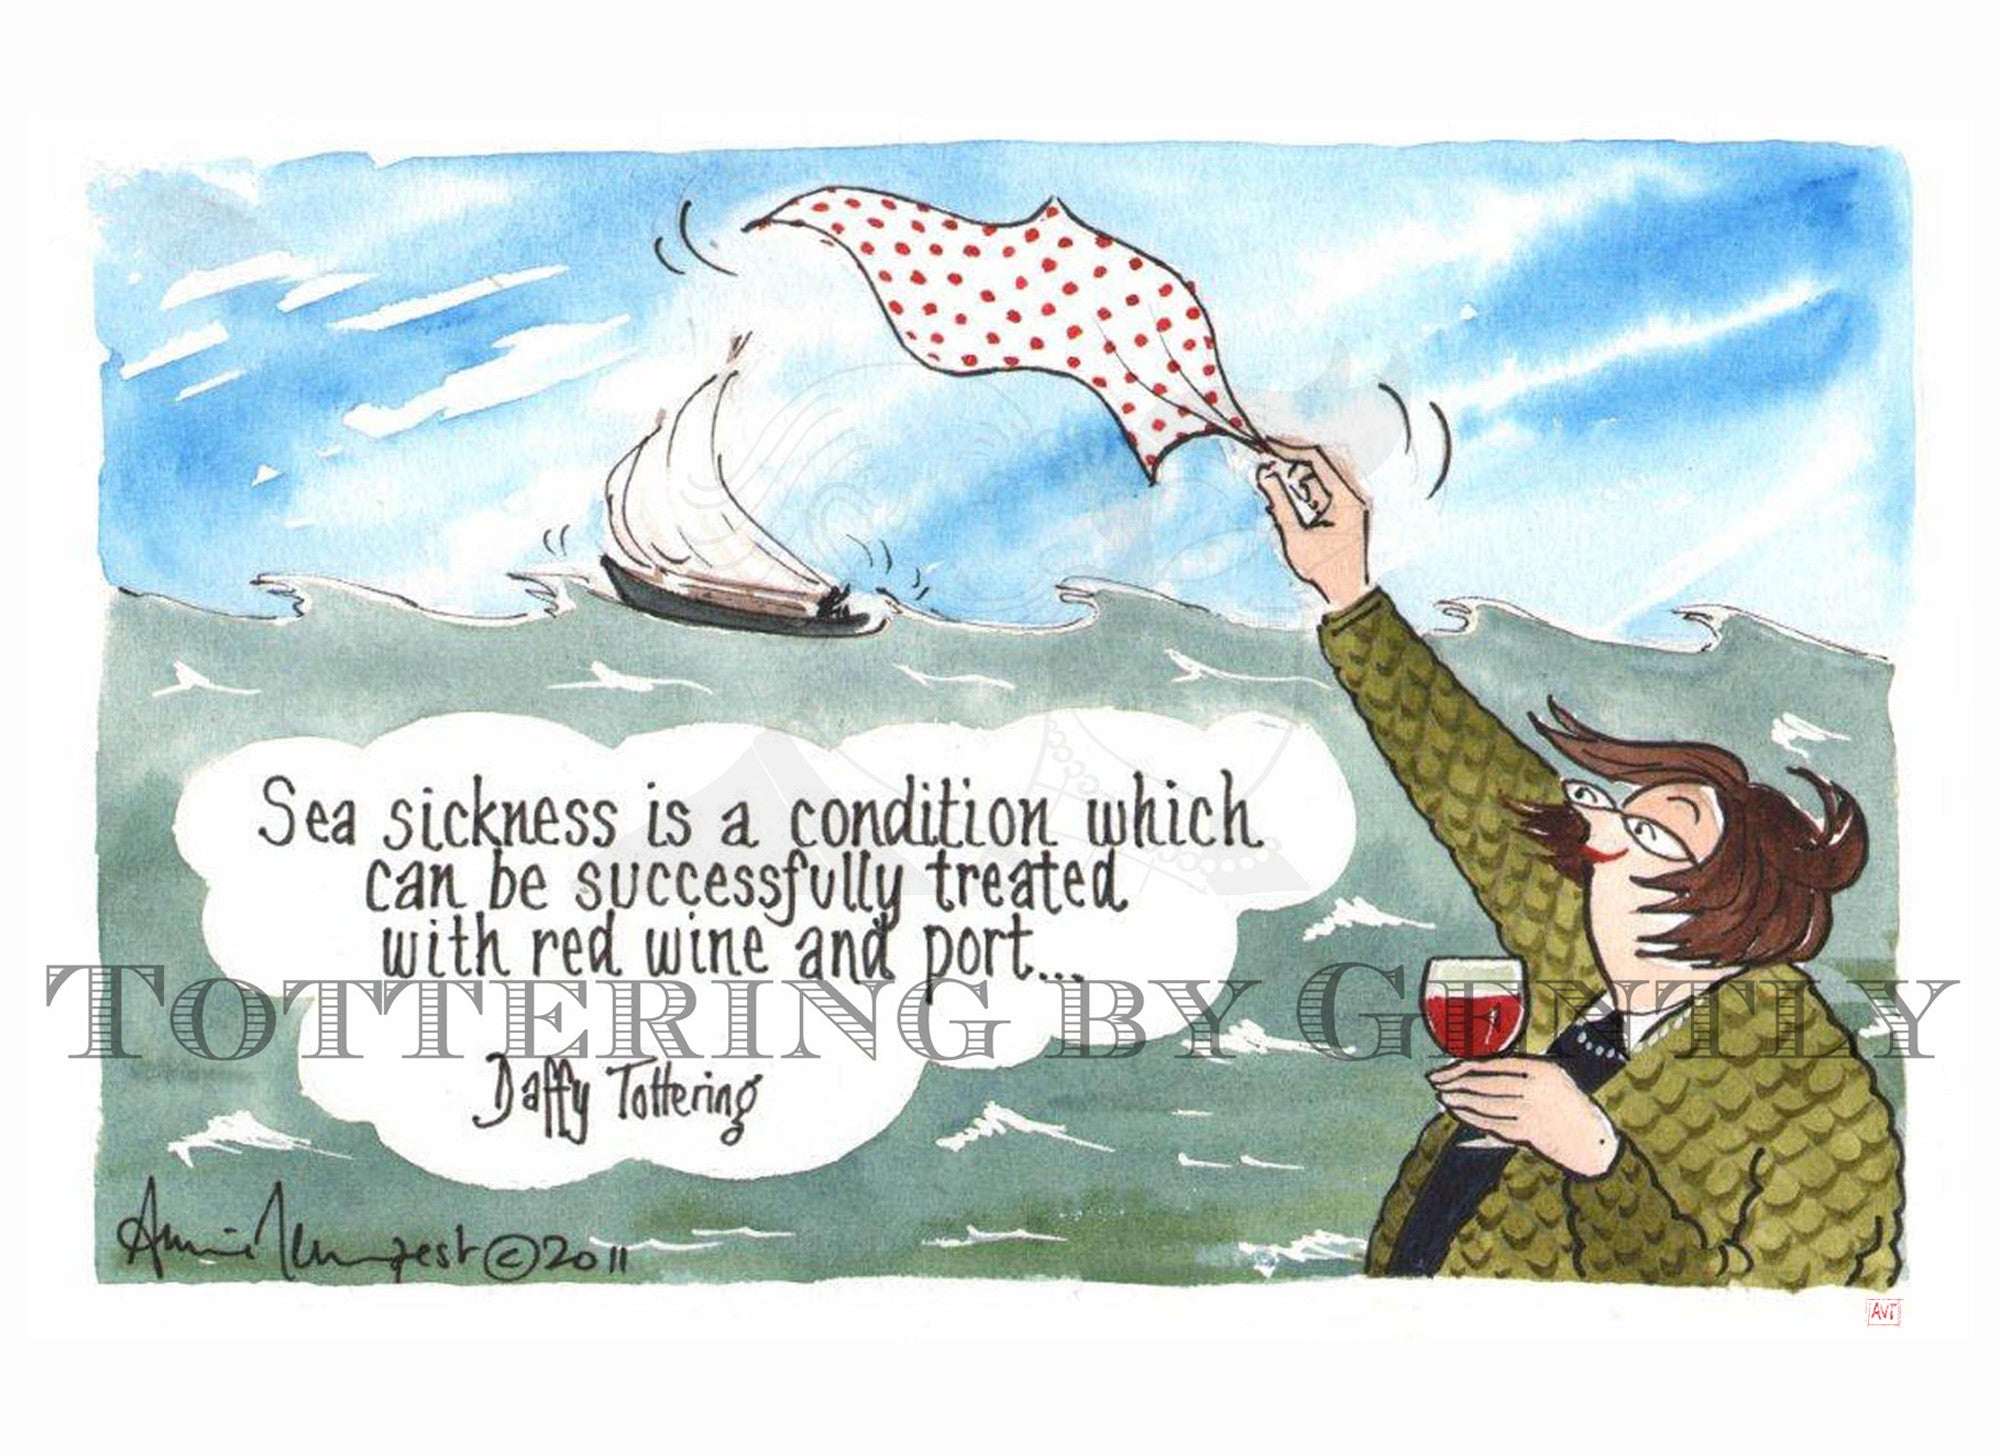 Sea sickness is a condition...  (S1113)